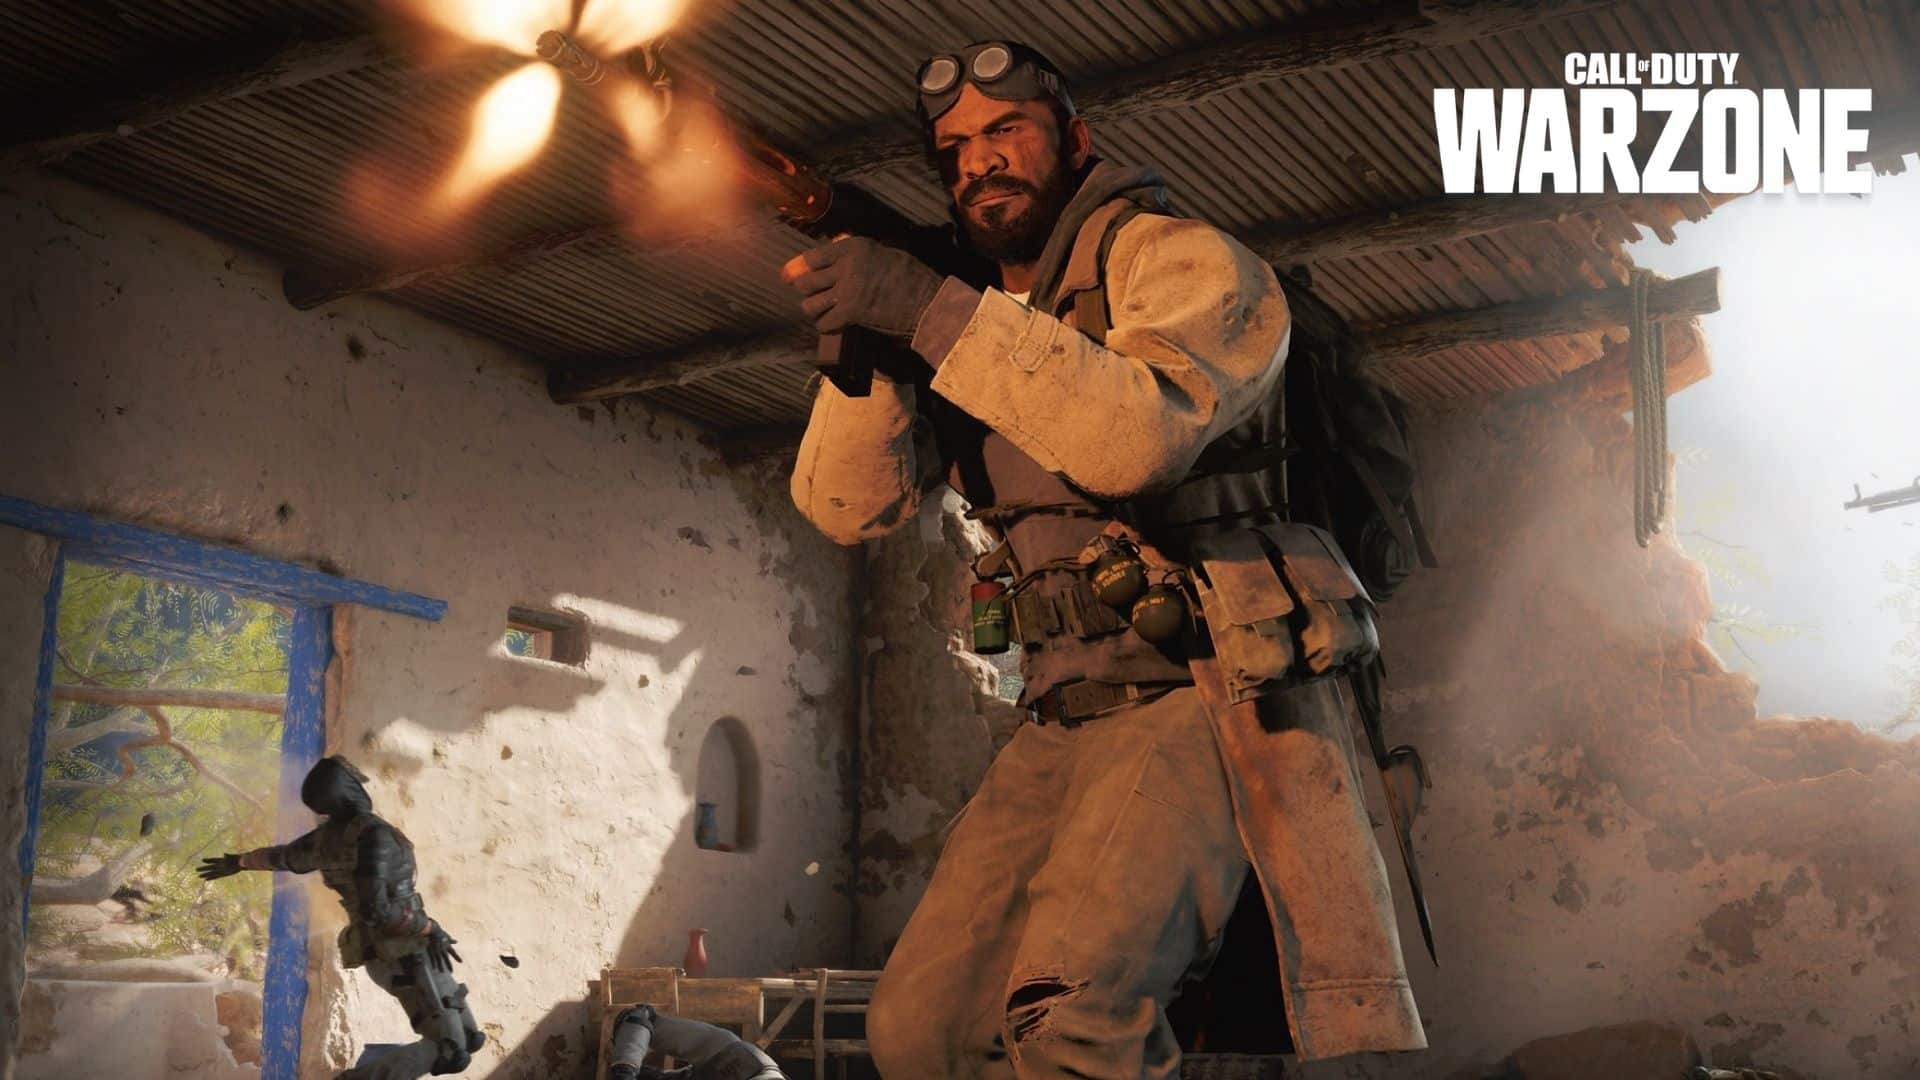 Cheating Worsens In Call Of Duty: Warzone, Crossplay Blamed By Fans - Xfire